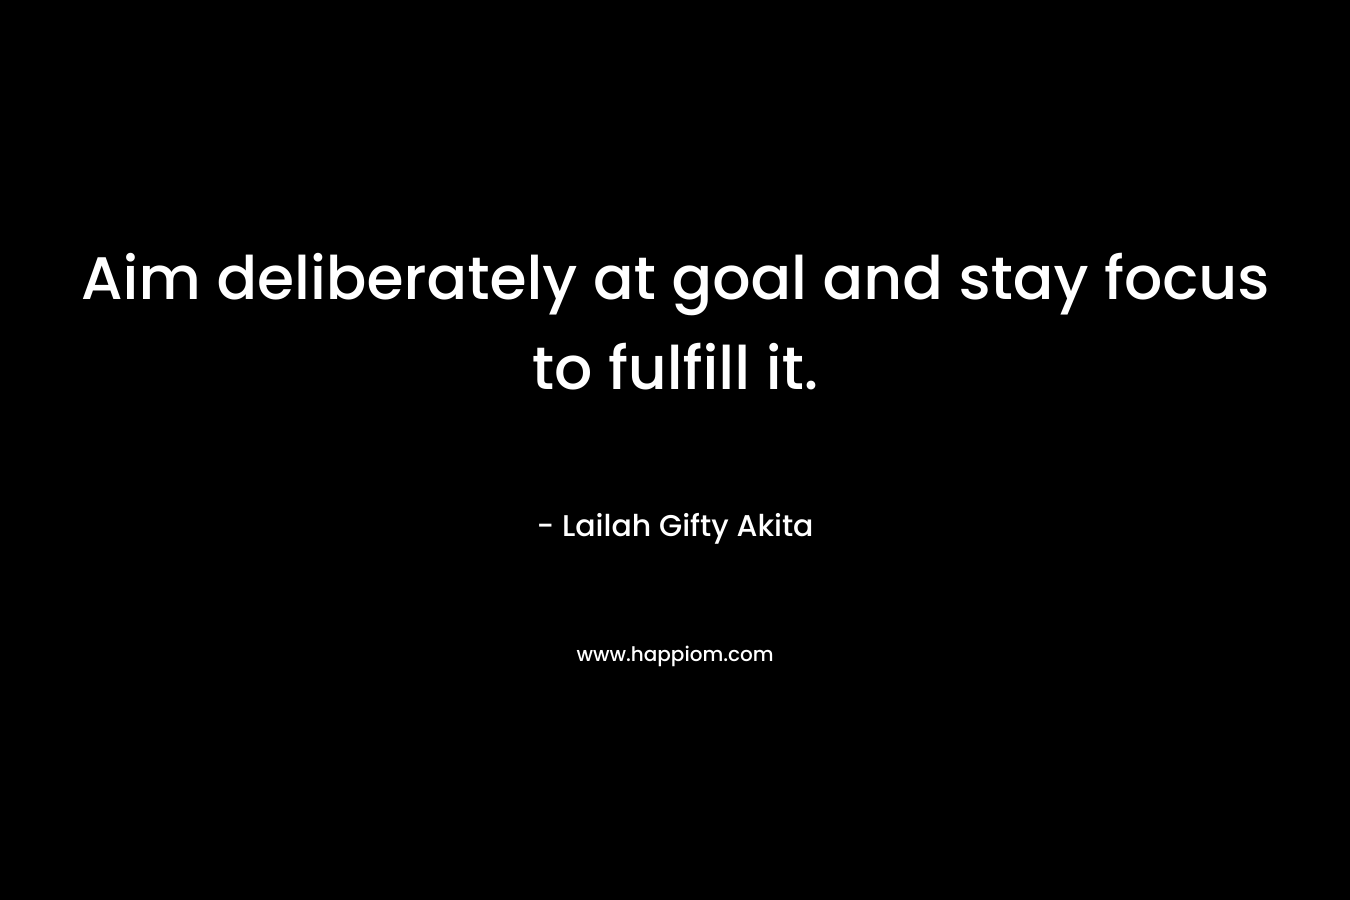 Aim deliberately at goal and stay focus to fulfill it.